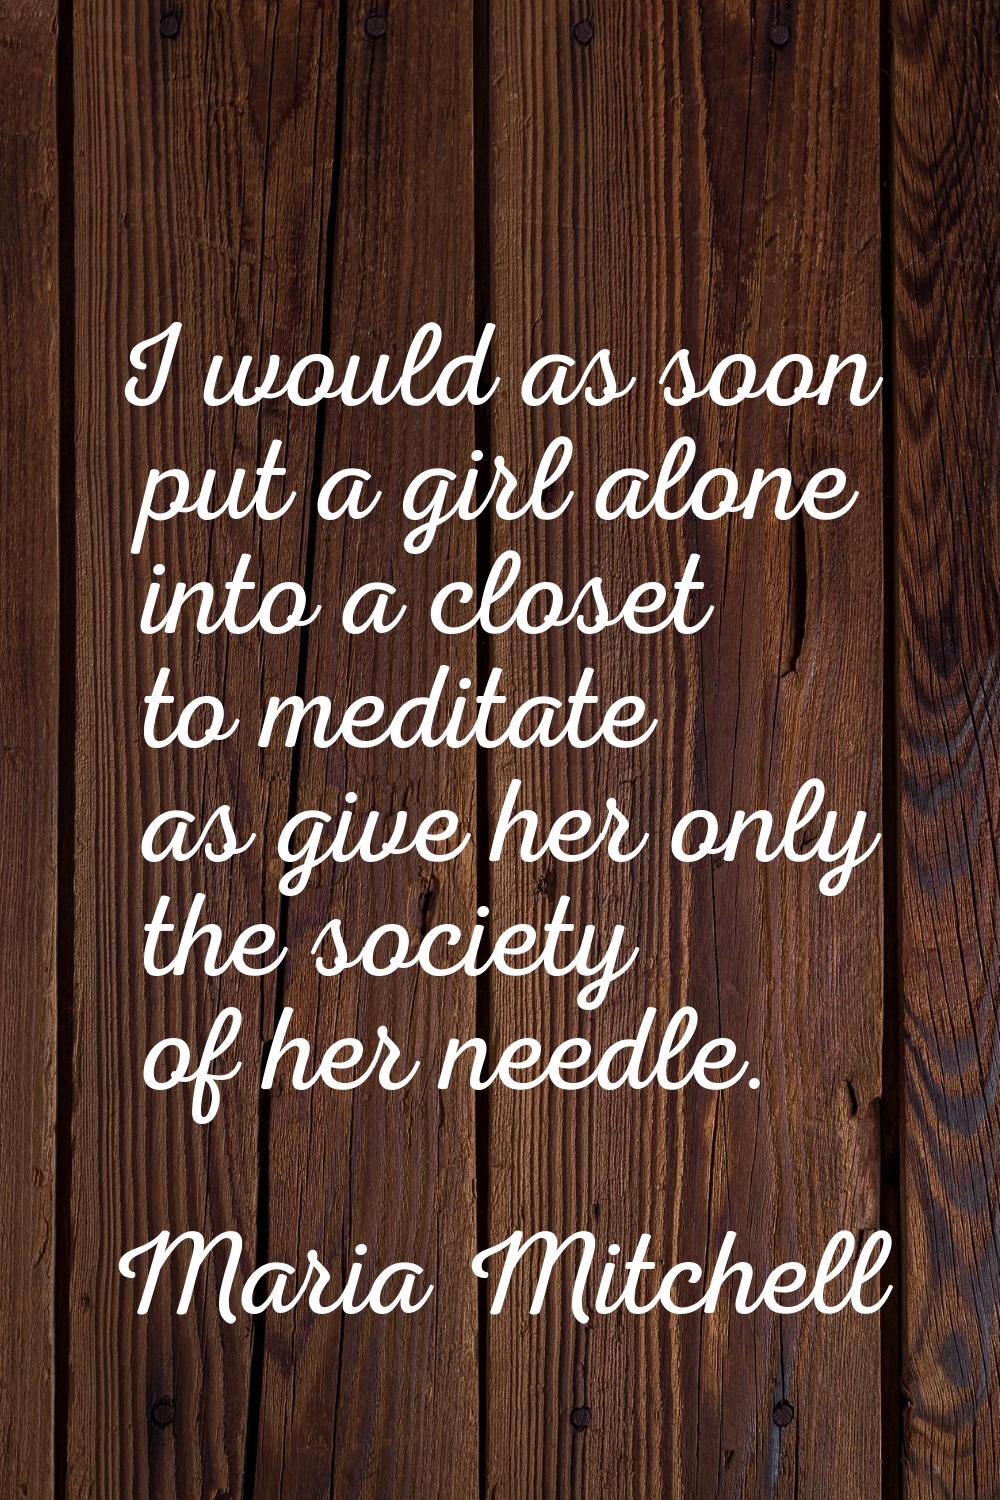 I would as soon put a girl alone into a closet to meditate as give her only the society of her need